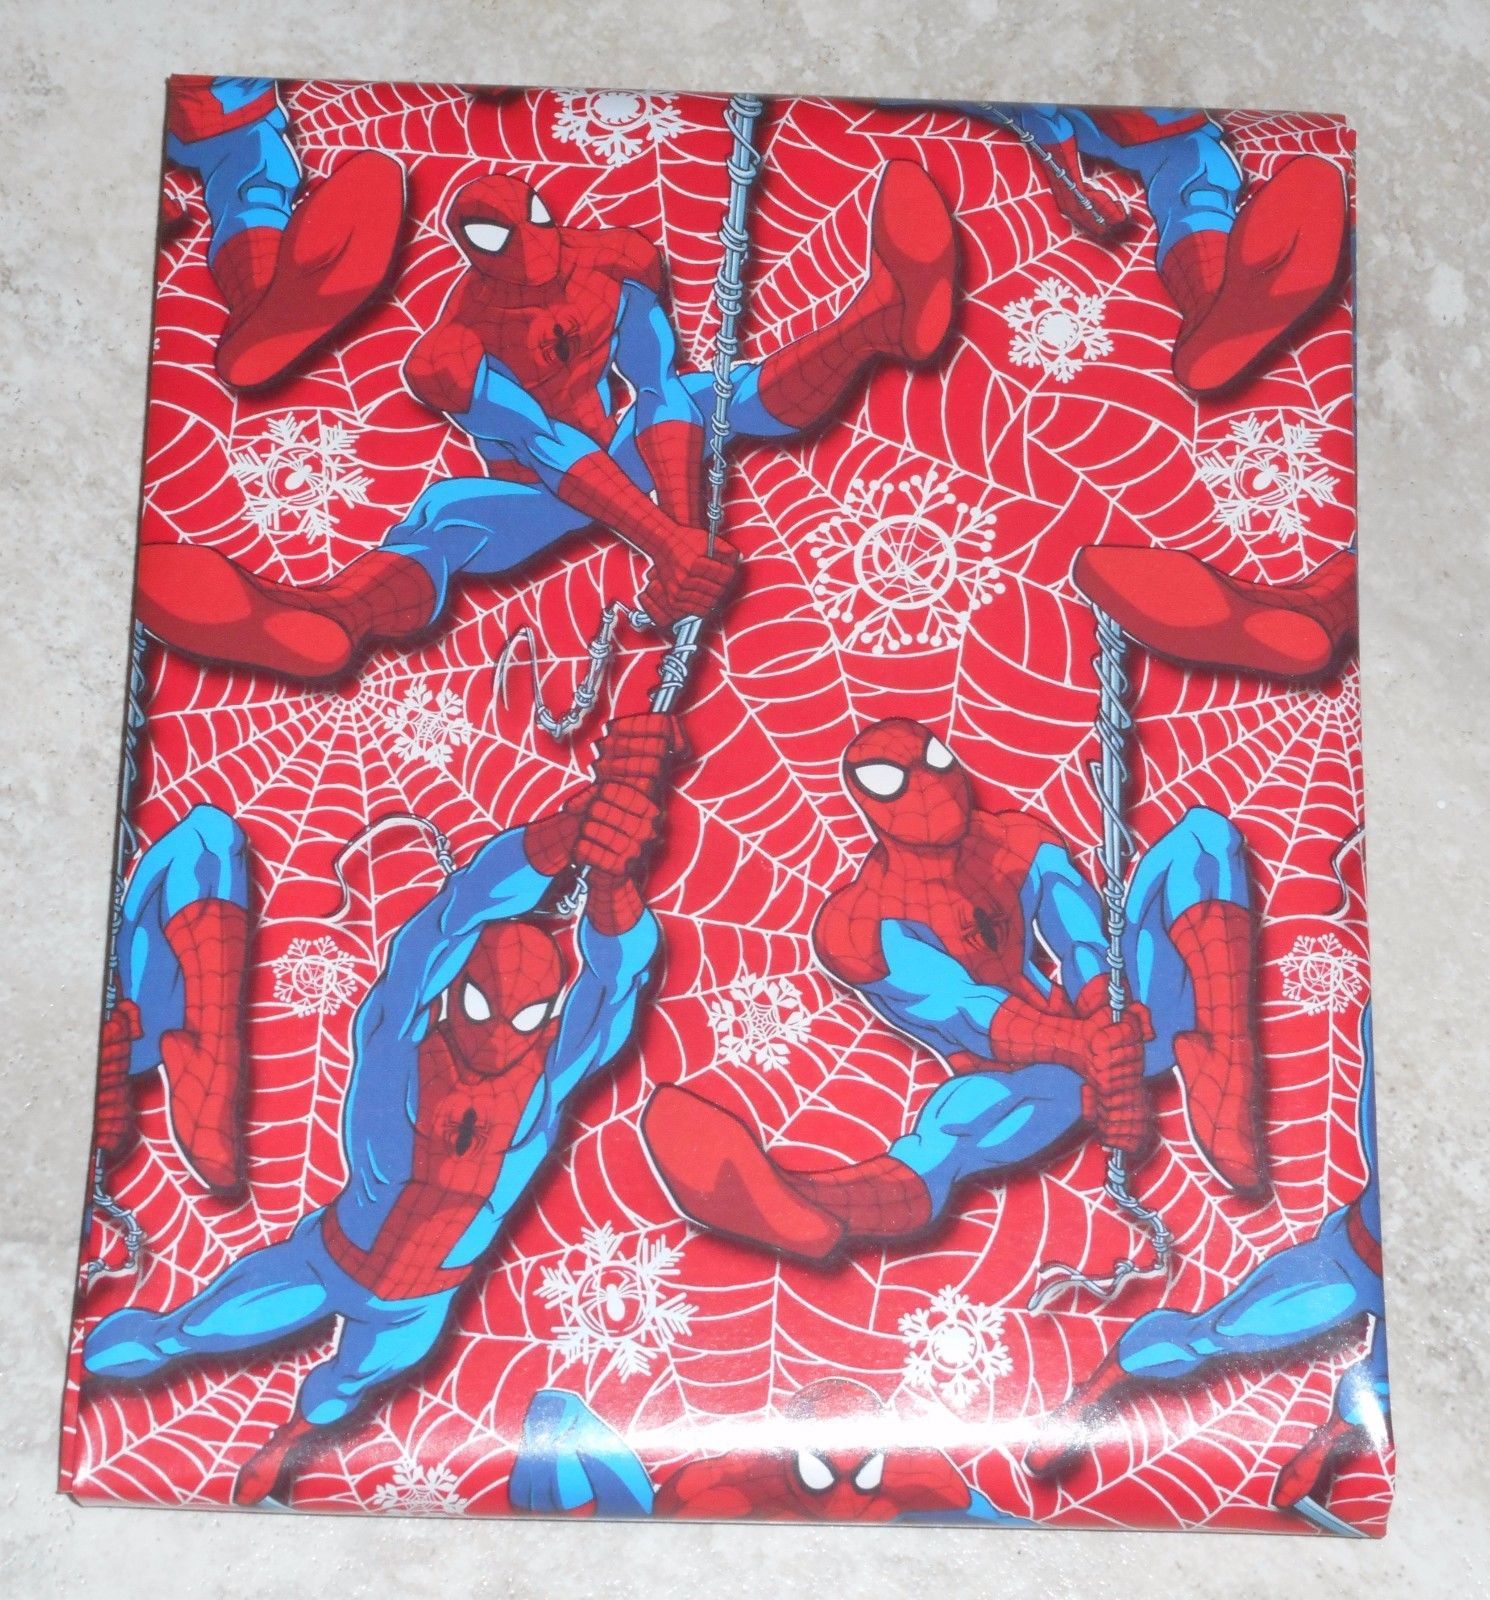 MARVEL SPIDERMAN CHRISTMAS WRAPPING PAPER 20 SQ FT